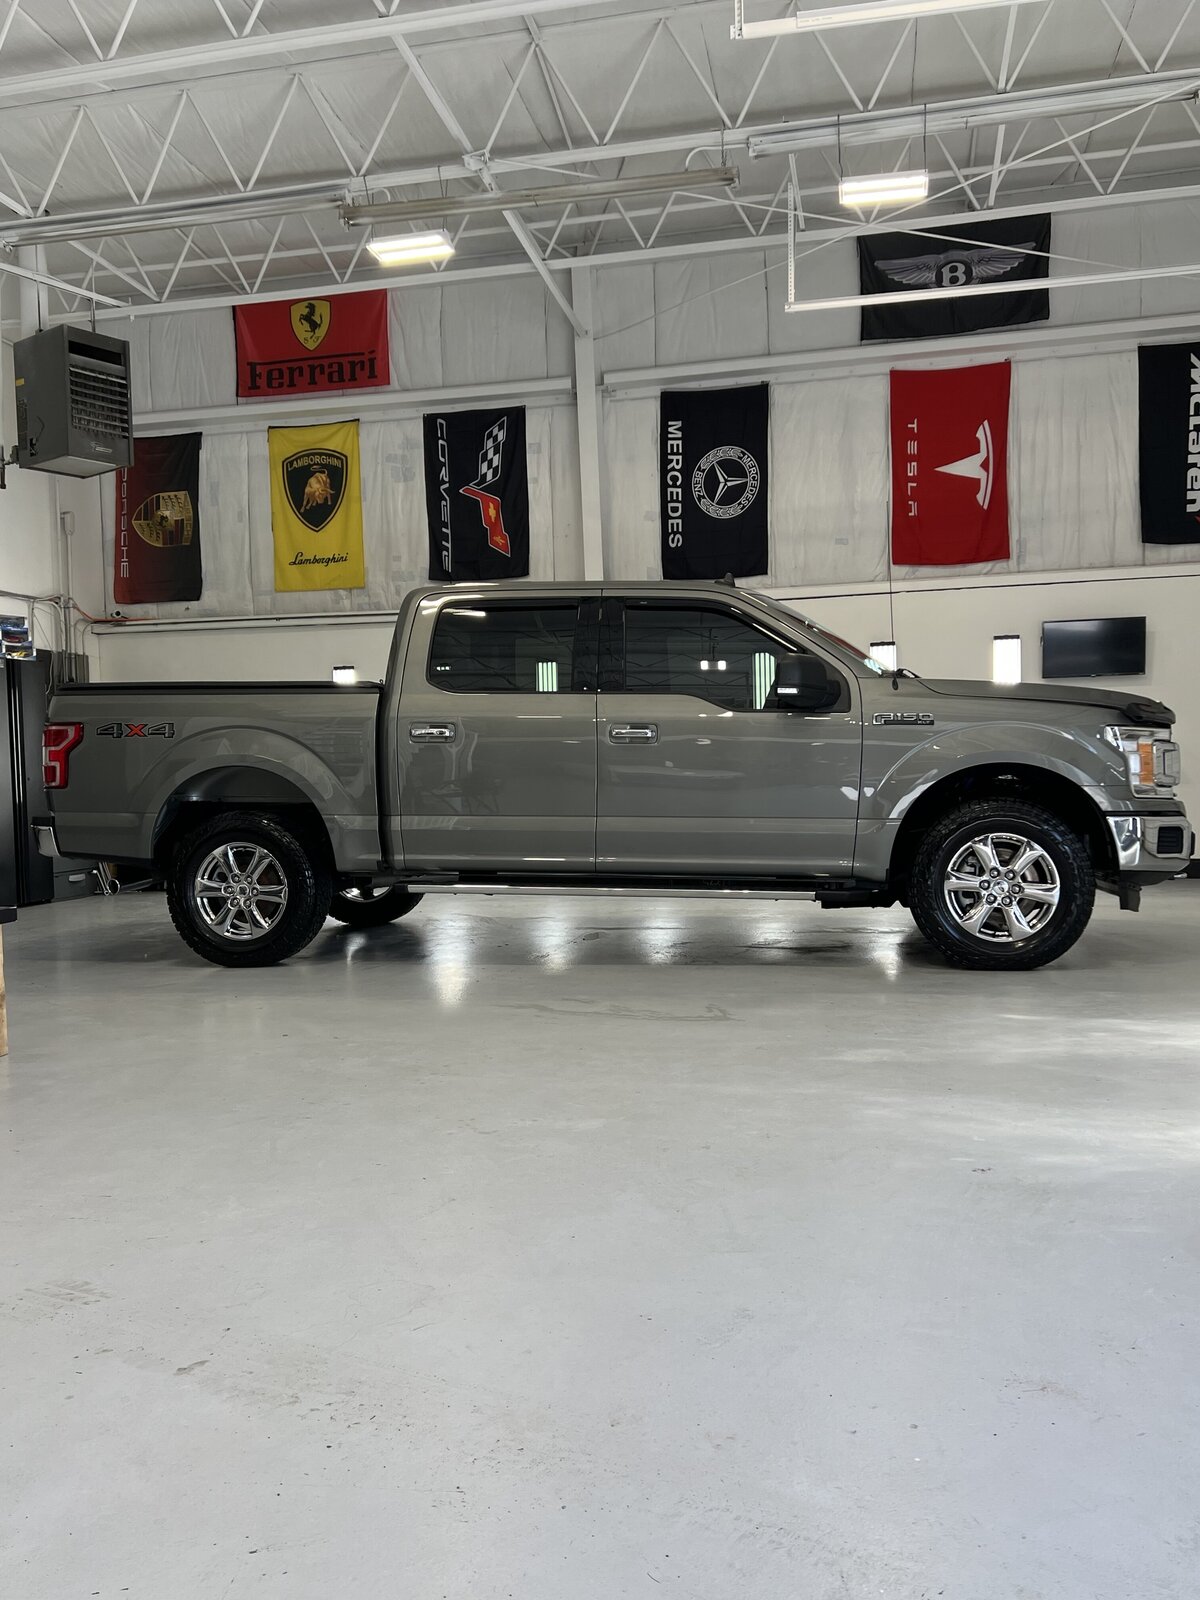 a-nice-touch-auto-detailing-paint-correction-F150-ford-north-haven-ct